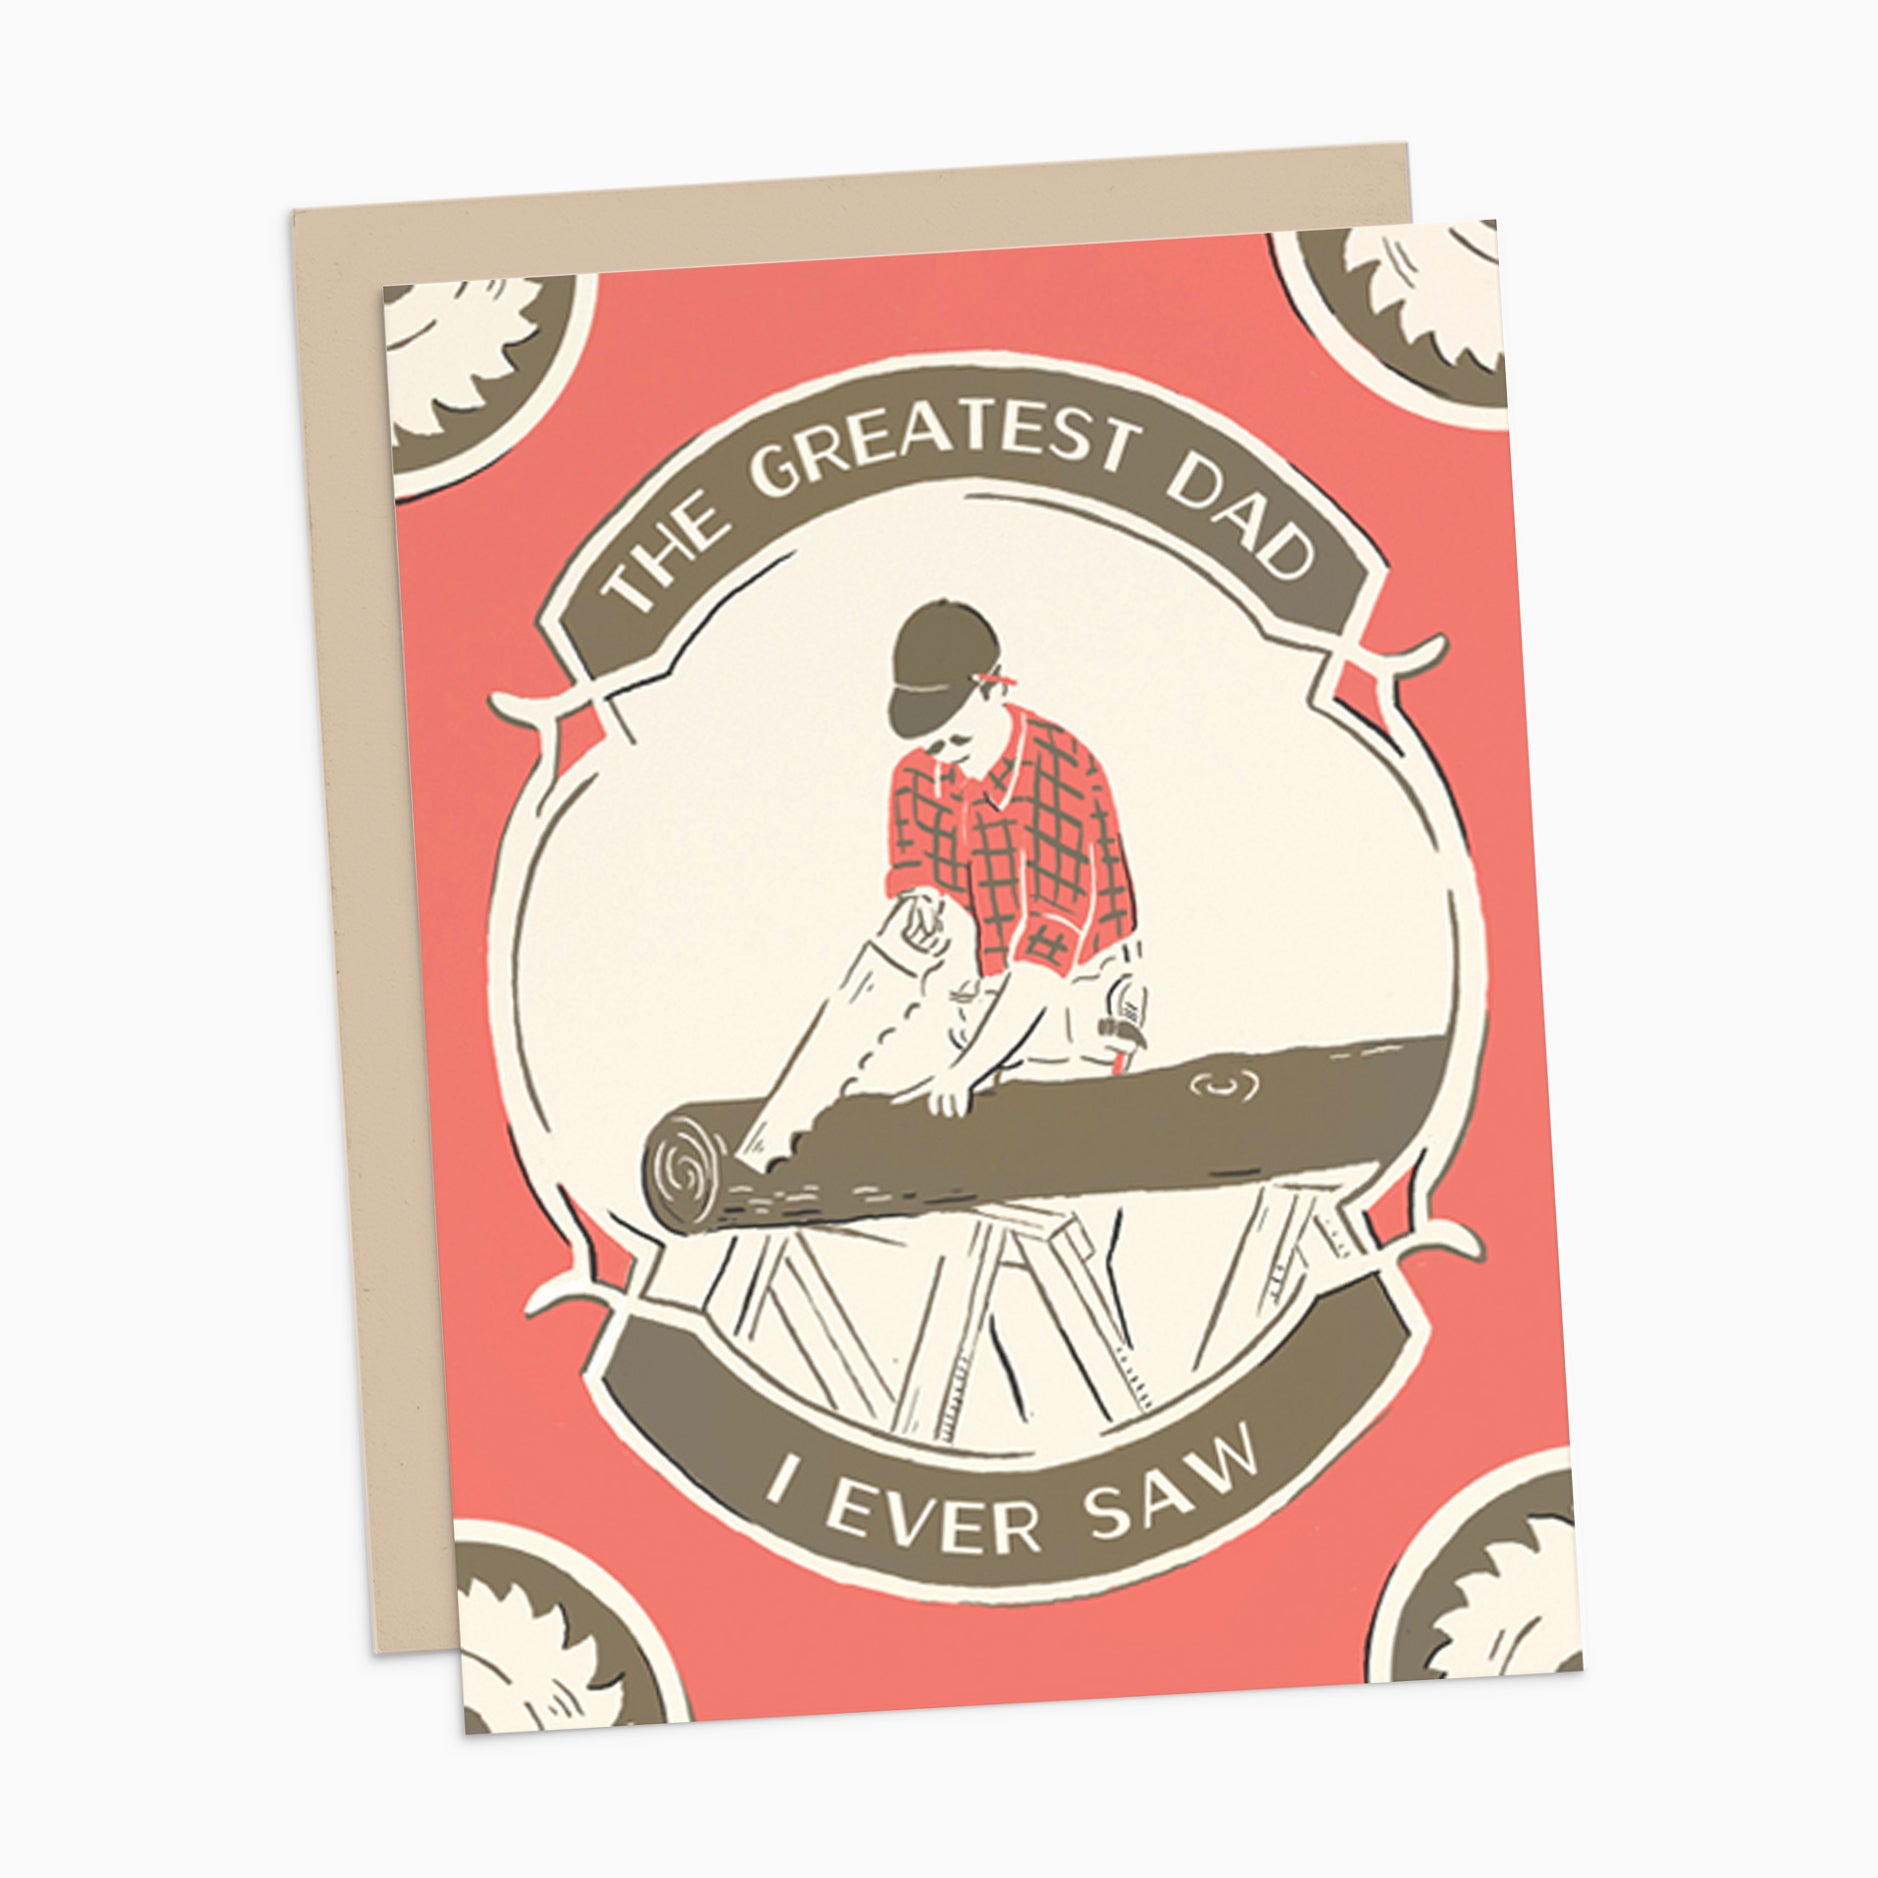 Illustrated Father's Day card on warm white cover cardstock, showing a person sawing a log and the punny text 'the greatest dad I ever saw,' perfect for celebrating Dad's special day. Positioned on a neutral background.